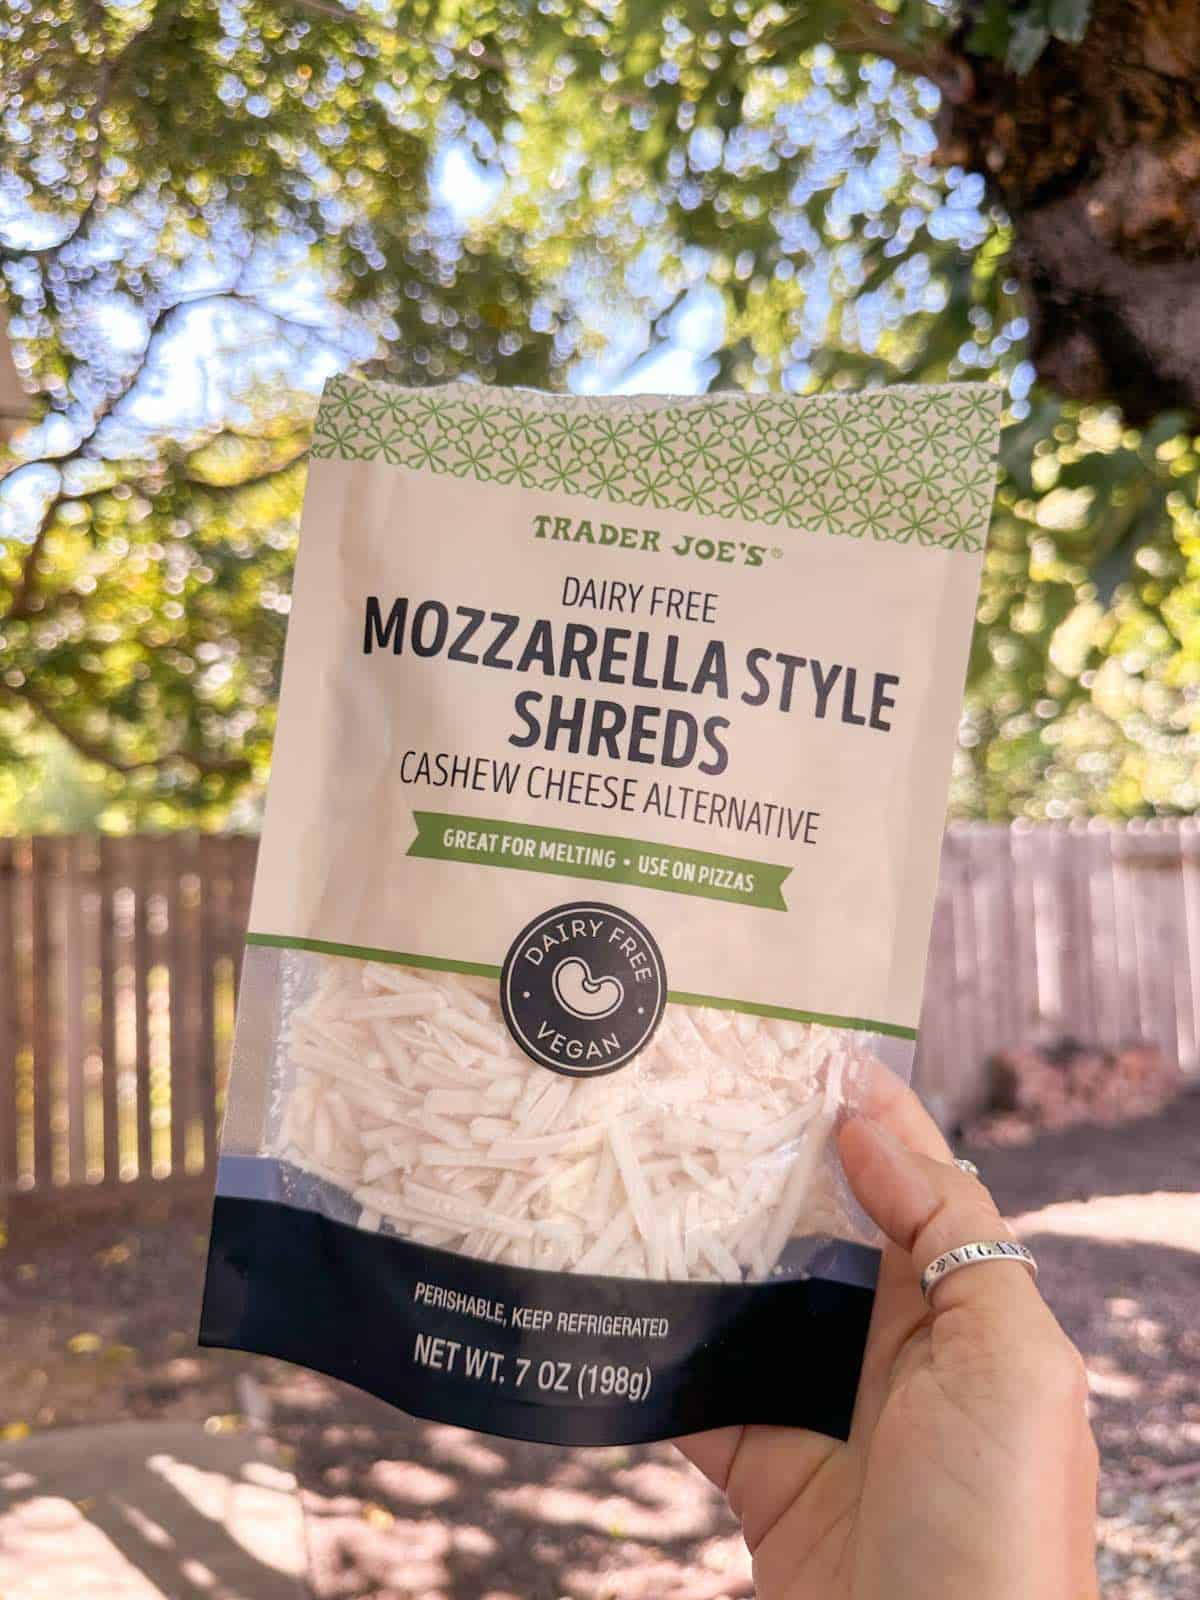 Woman holding out a package of vegan mozzarella shreds from the grocery store Trader Joe's.